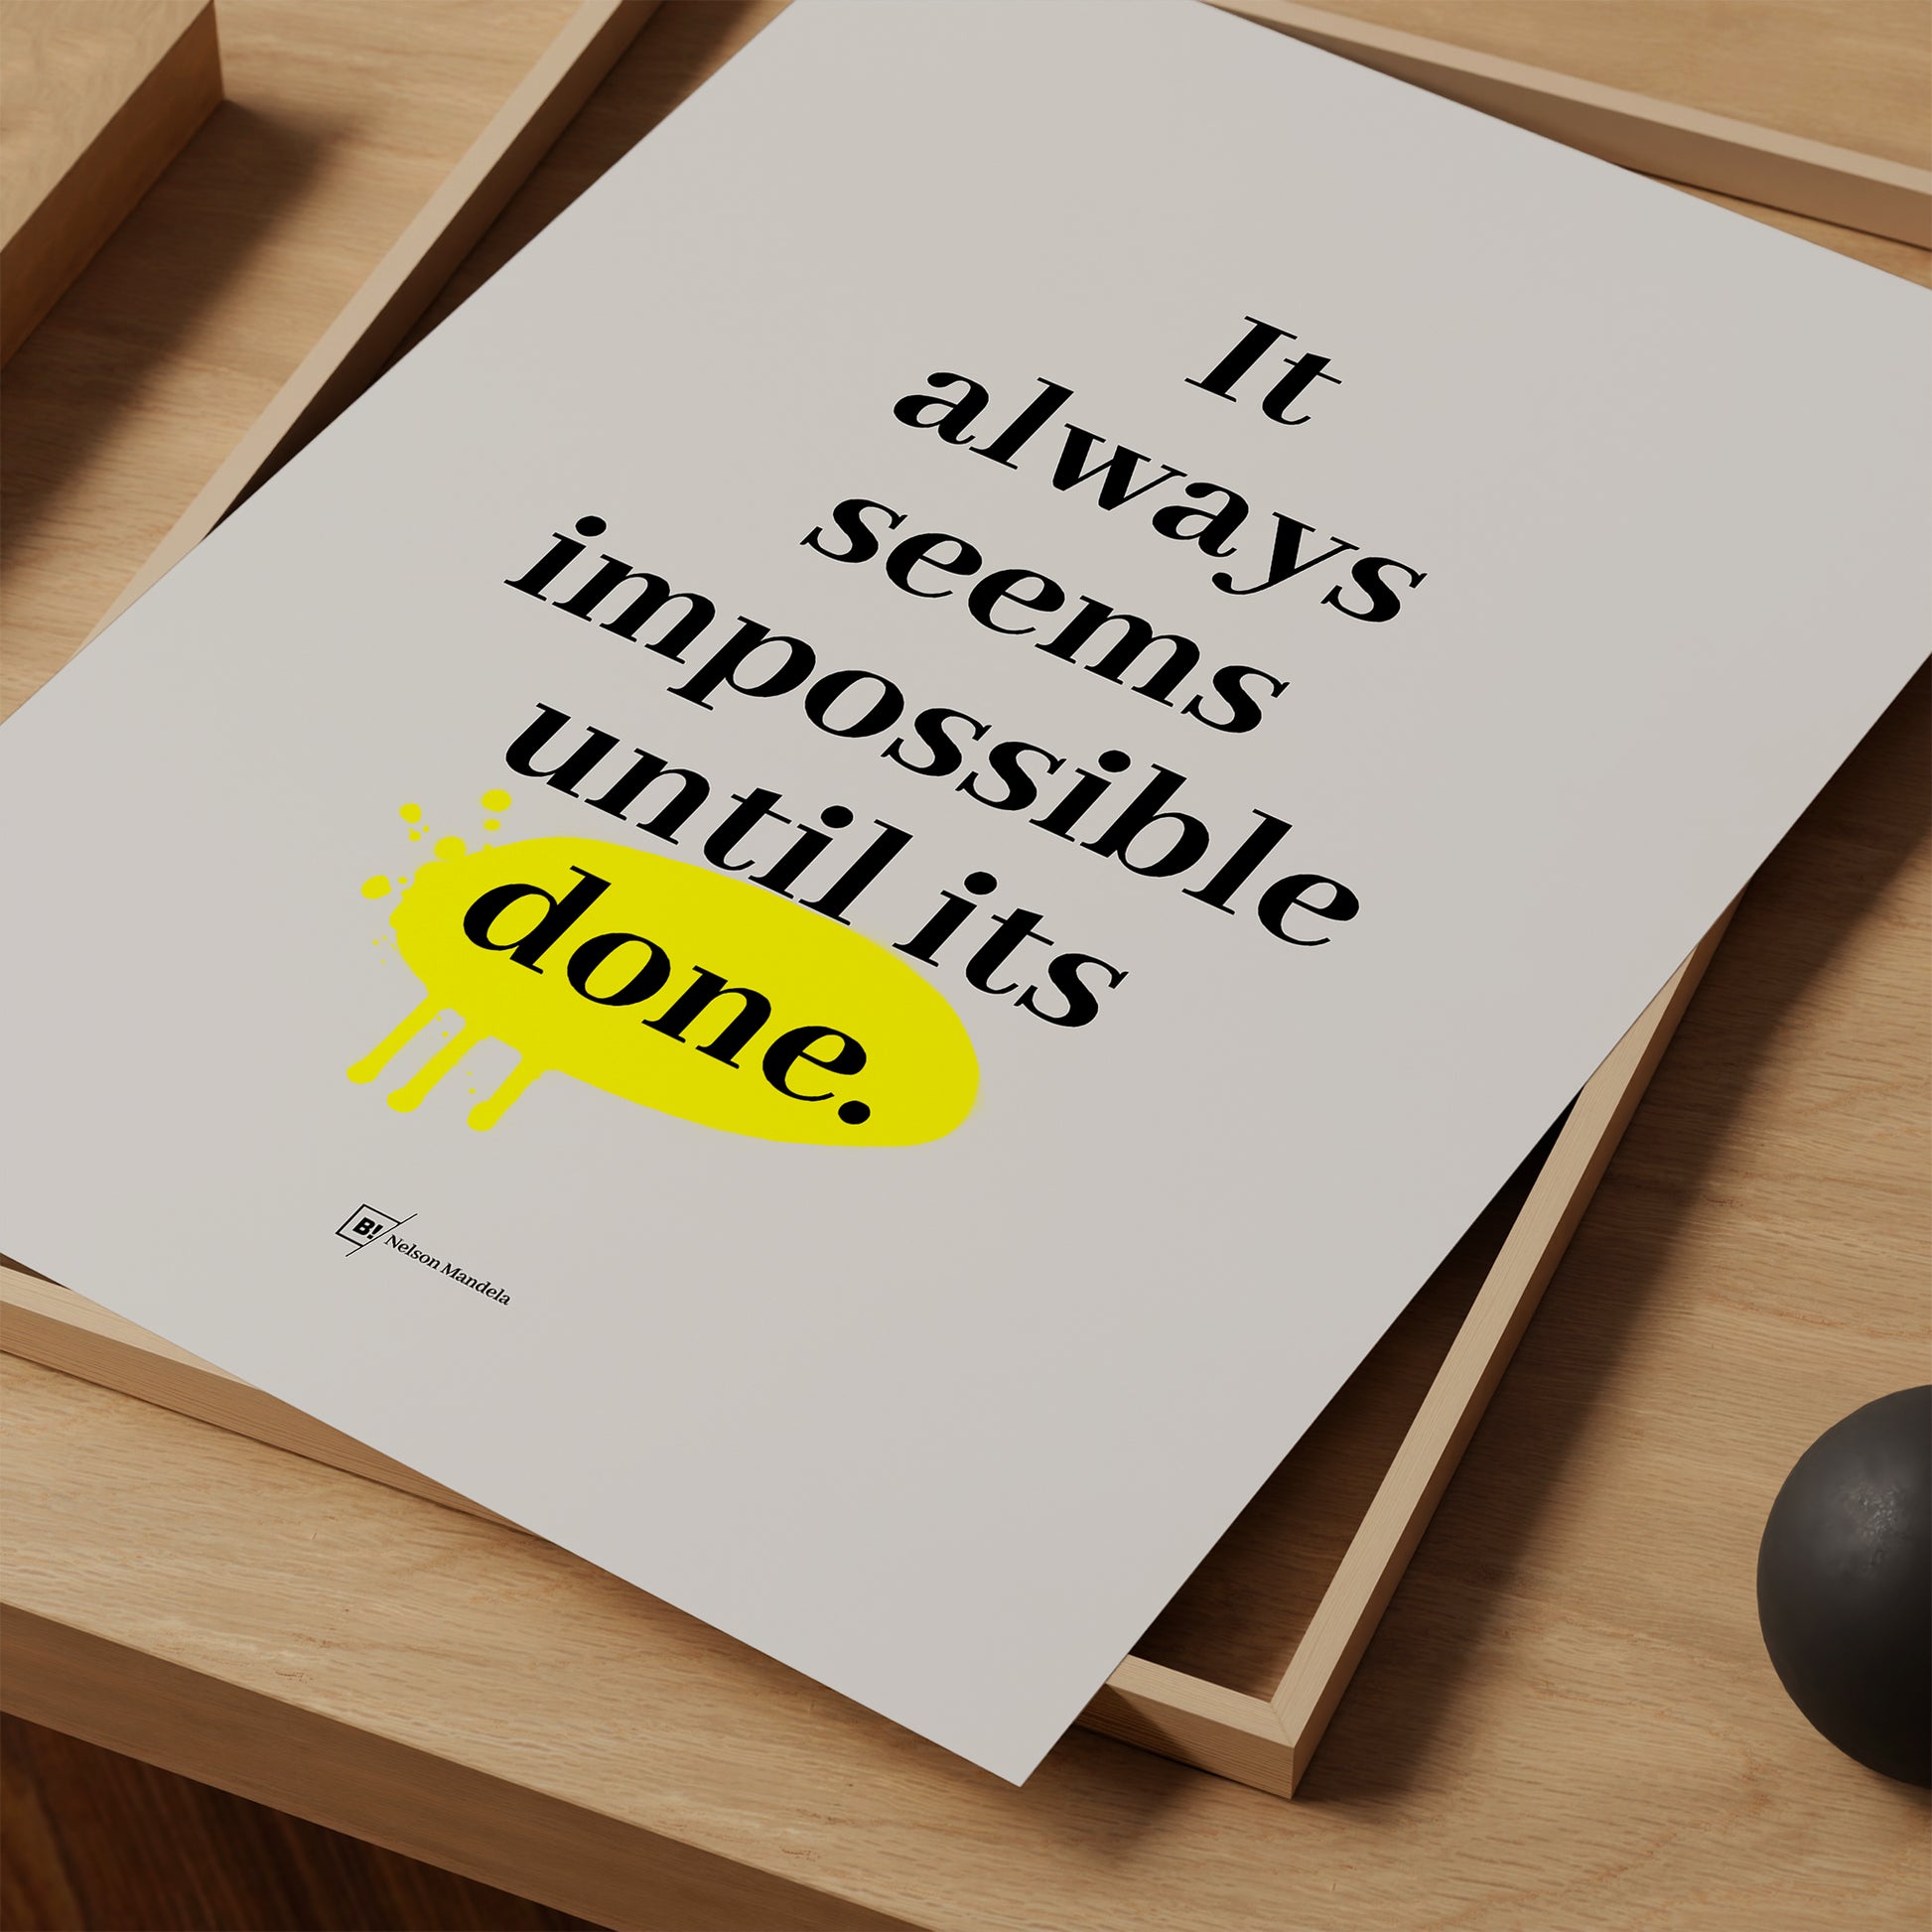 Be inspired by Nelson Mandela's famous "It always seems impossible until its done" quote art print. This artwork was printed using giclée on archival acid-free paper and is presented as a print close-up that captures its timeless beauty in every detail.